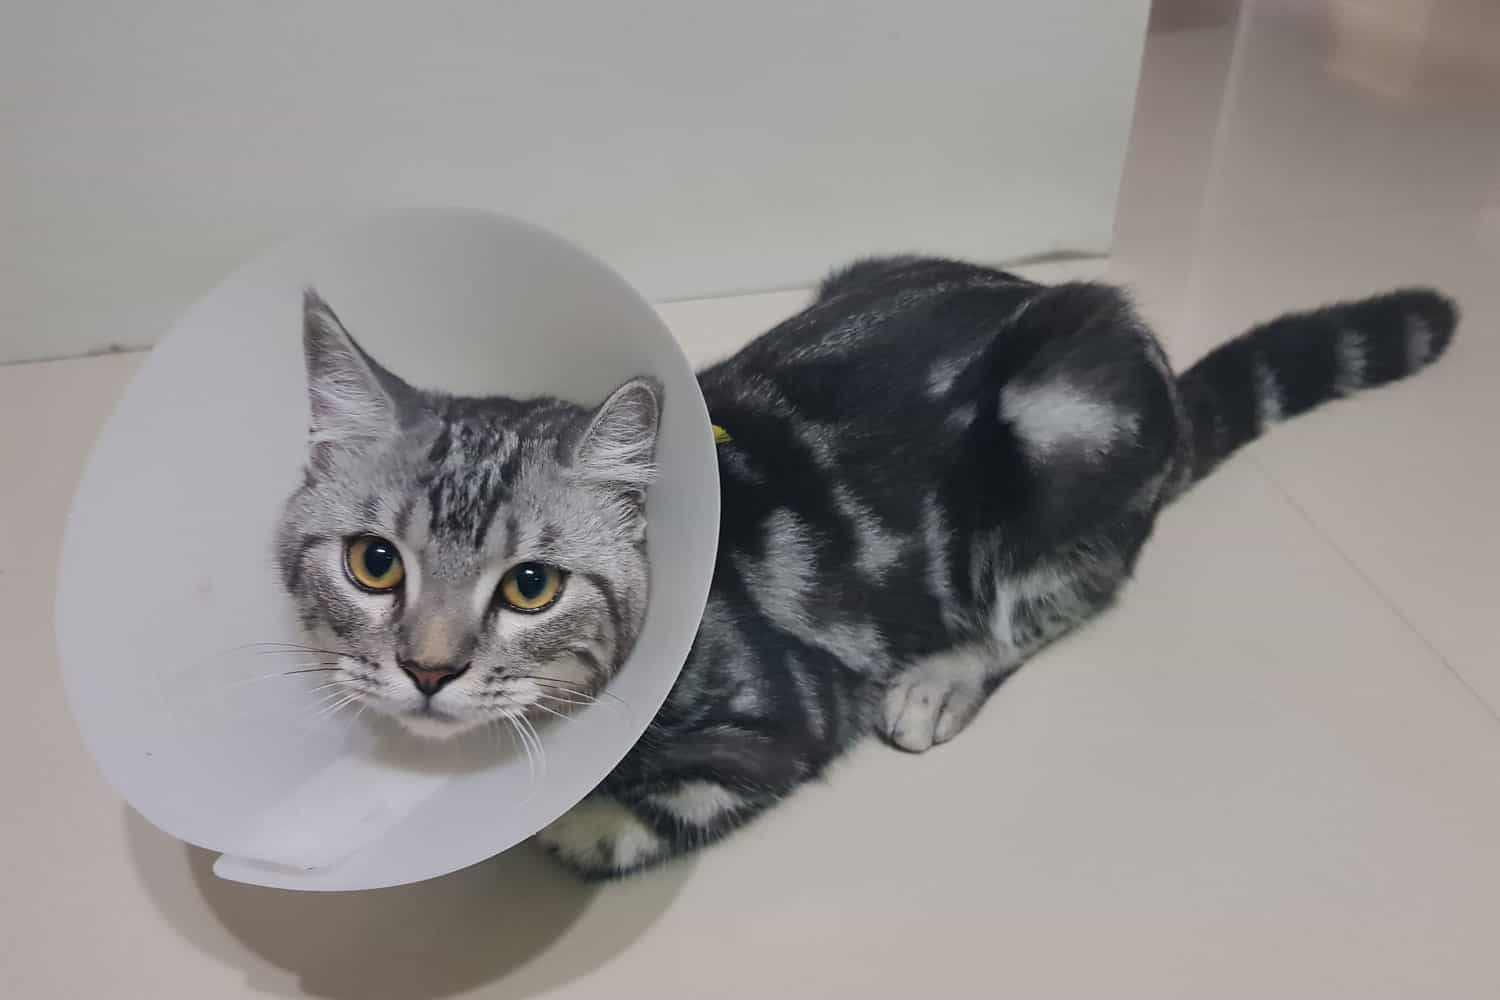 Cat after neutering with elizabethan collar
